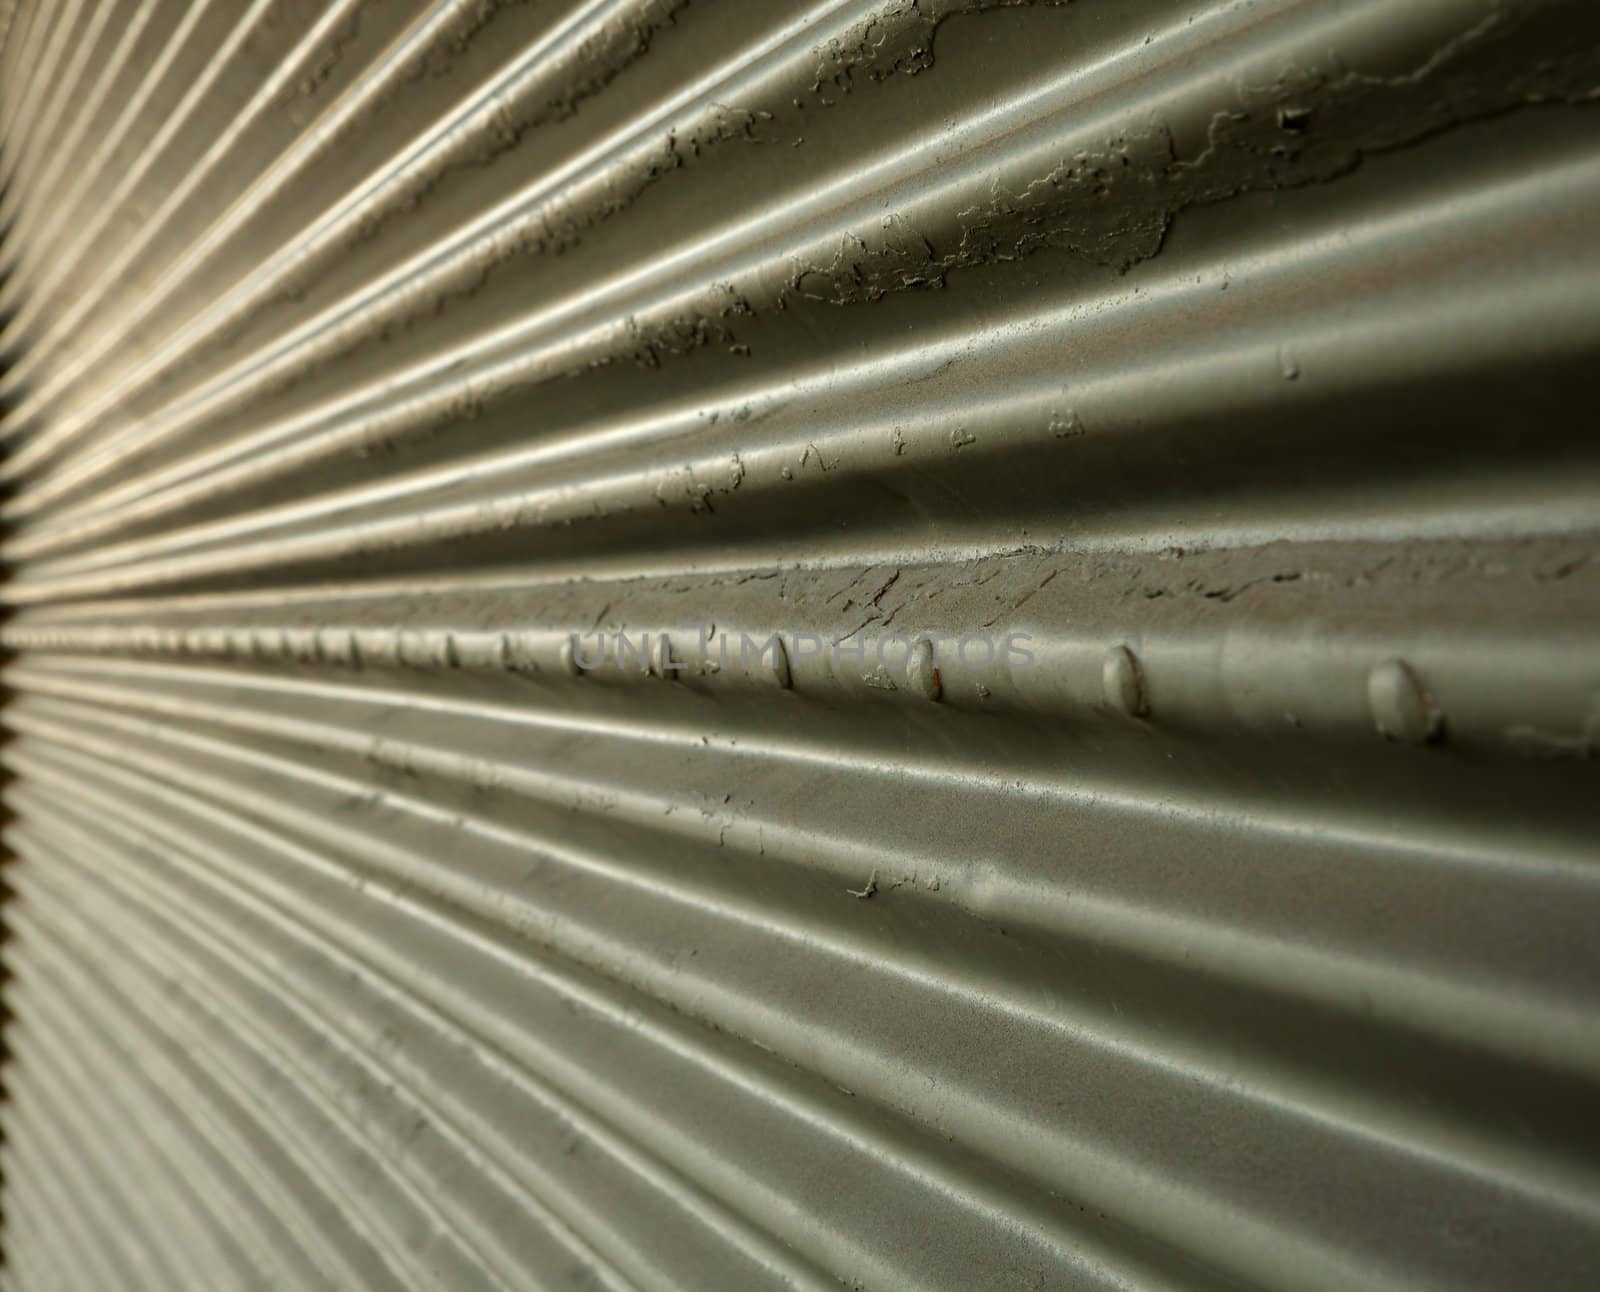 Corrugated steel wall in perspective leading to a point